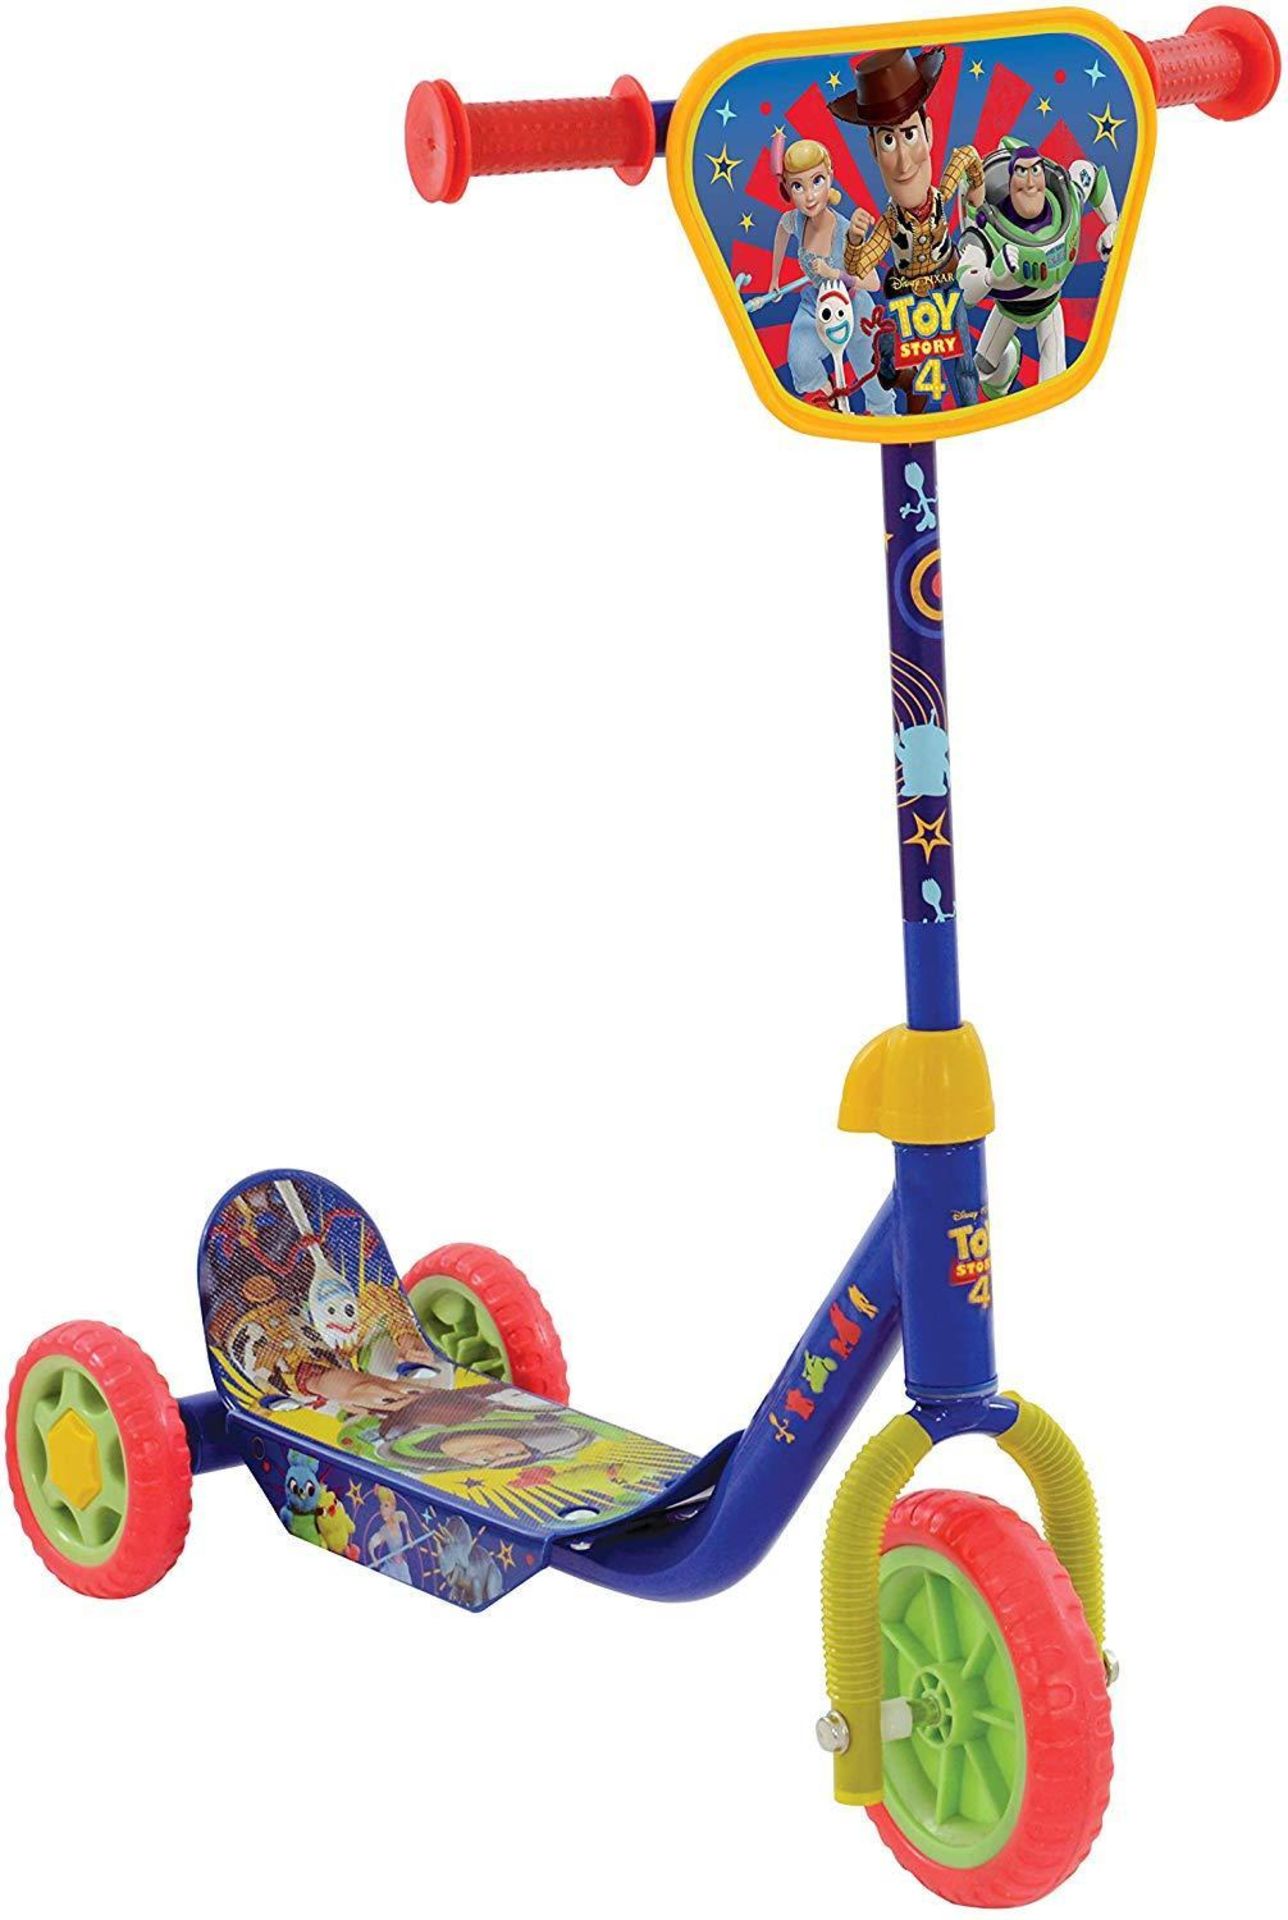 Toy Story 4 M004164 Deluxe Tri Scooter Toy Story, Multi £24.36 RRP